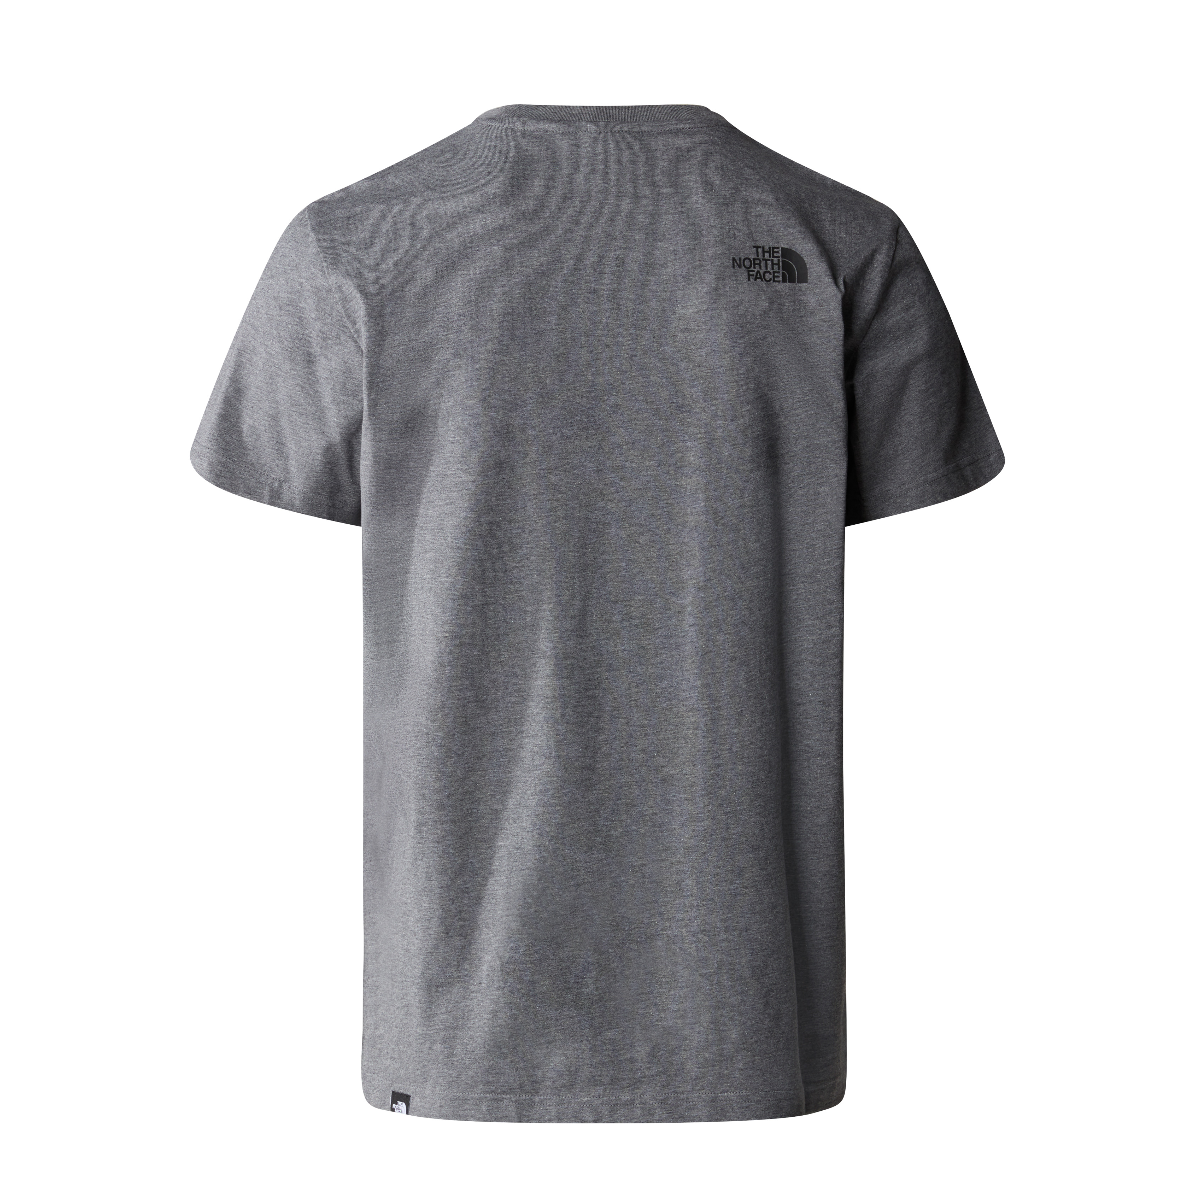 The North Face Simple Dome Men's T-Shirt | TNF Medium Grey Heather (New Model)